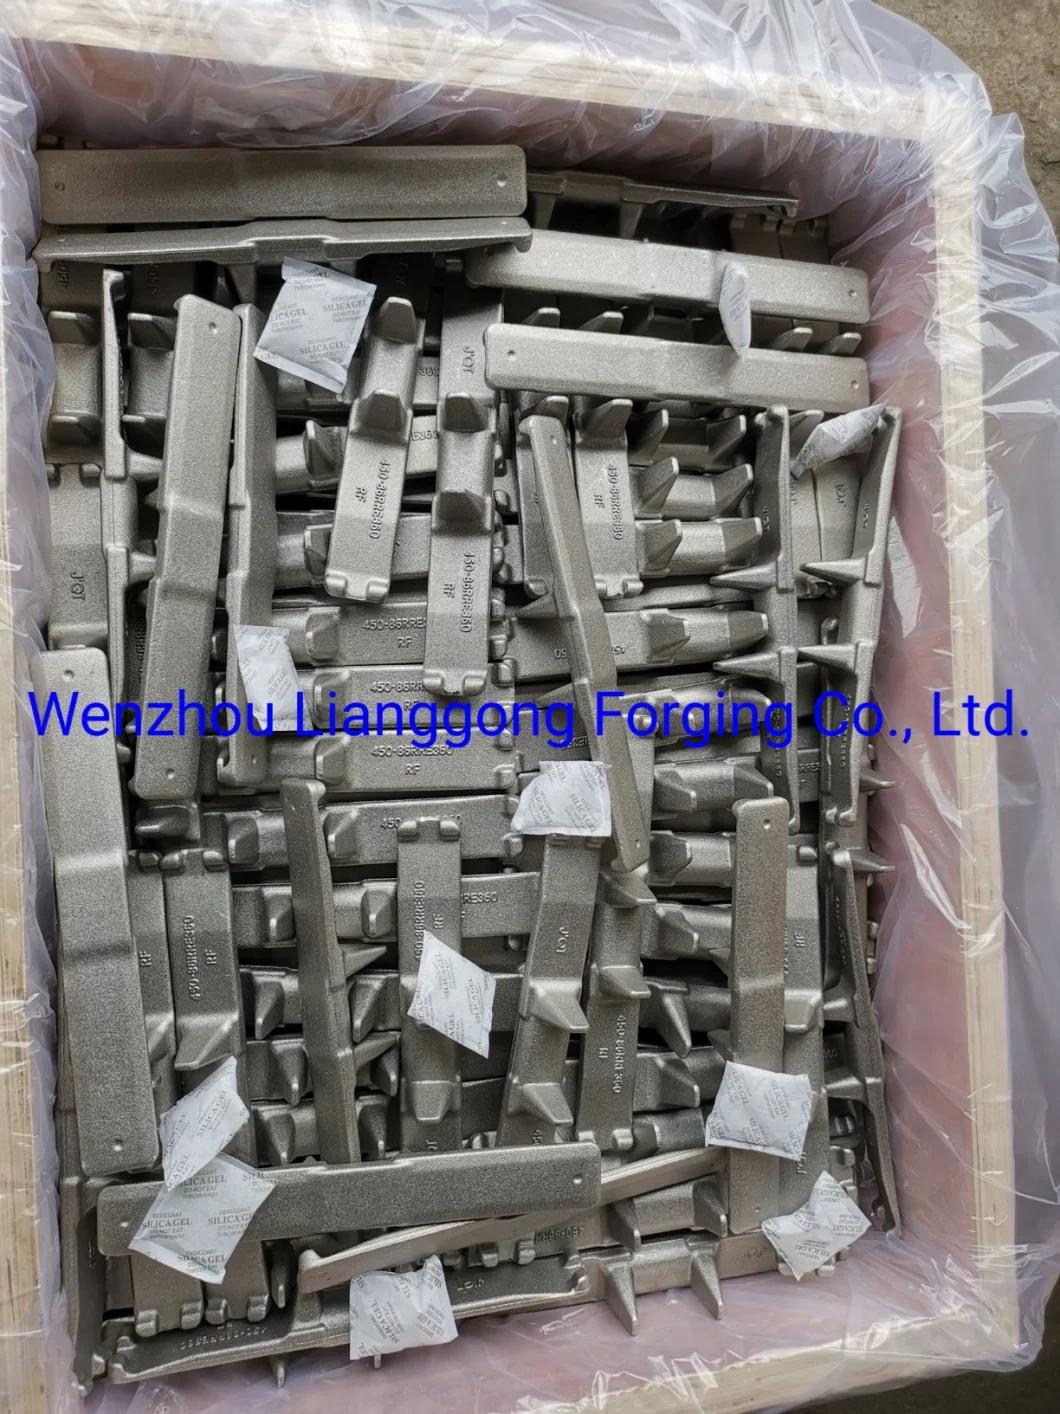 Adopt Hot Die Forging Process to Produce Automobile Spare Parts Construction Machinery Spare Parts Railway Spare Parts